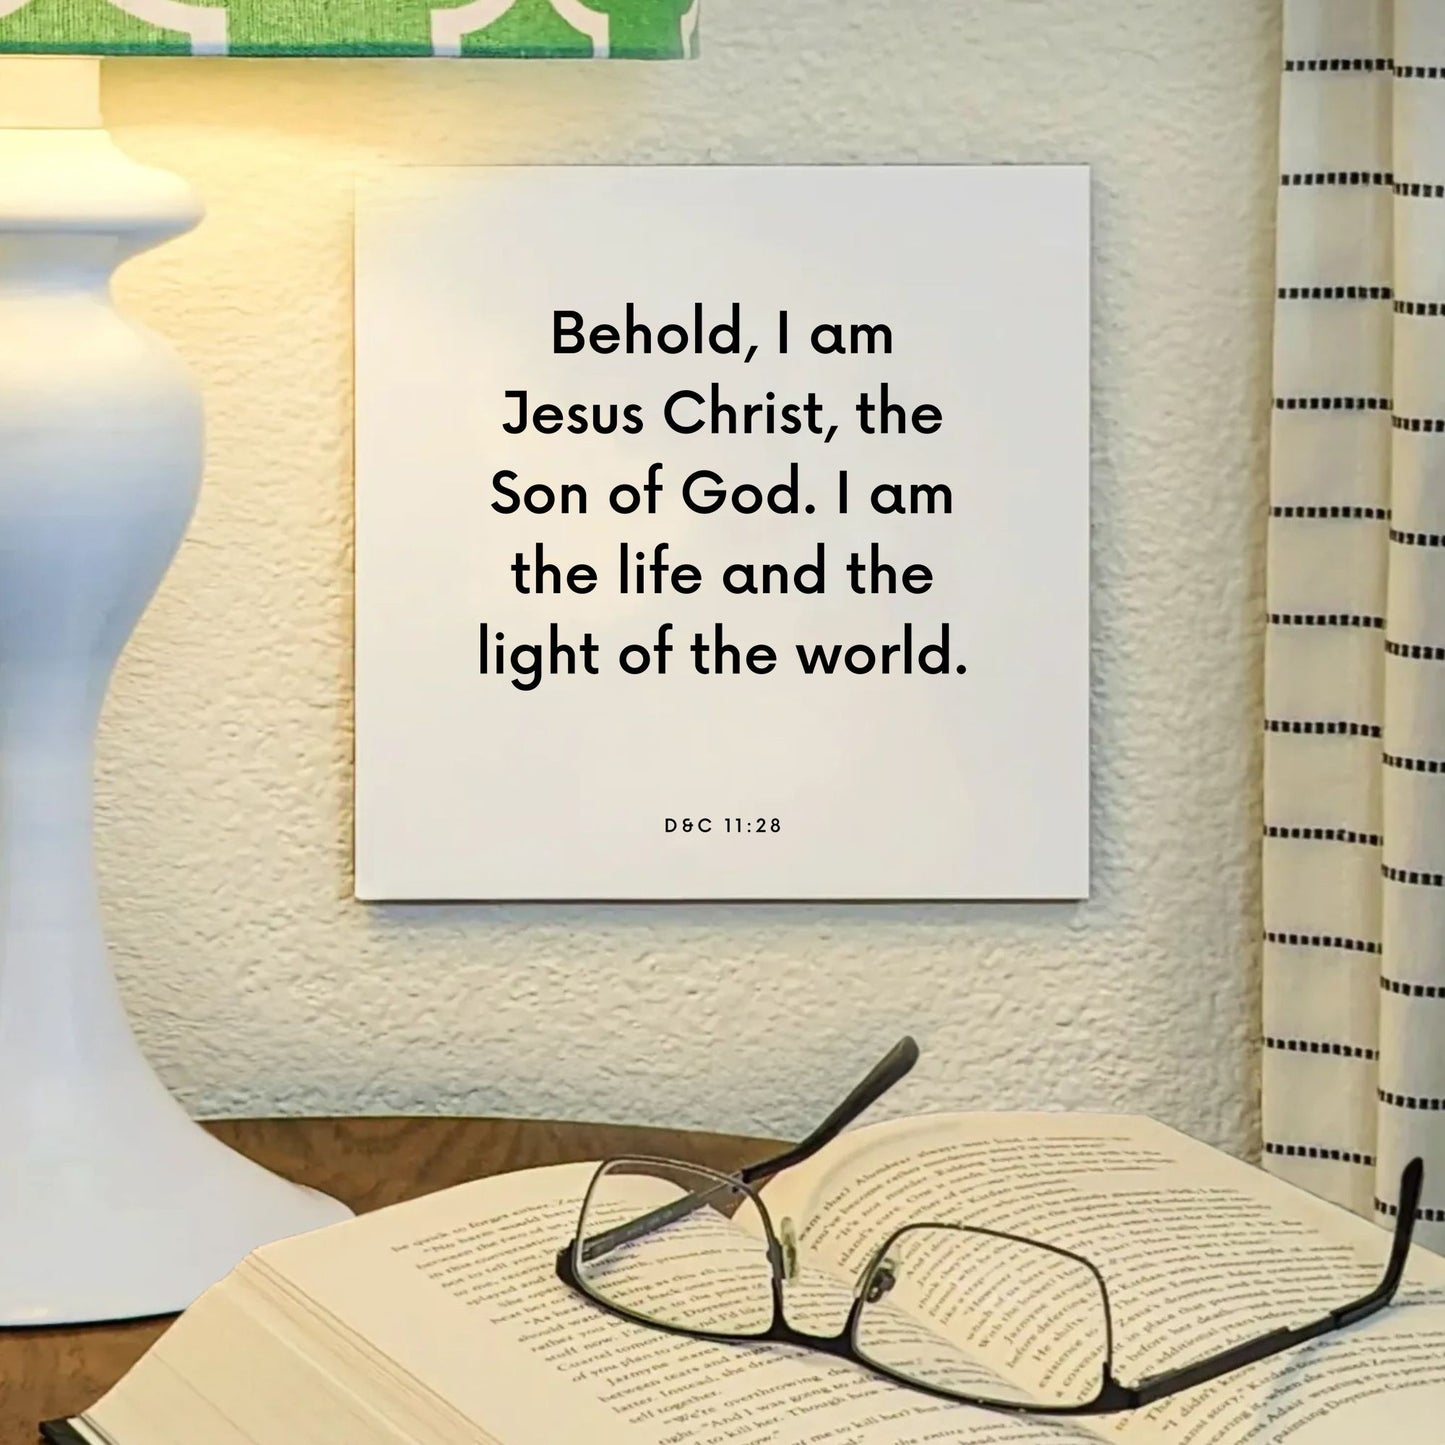 Lamp mouting of the scripture tile for D&C 11:28 - "Behold, I am Jesus Christ, the Son of God"